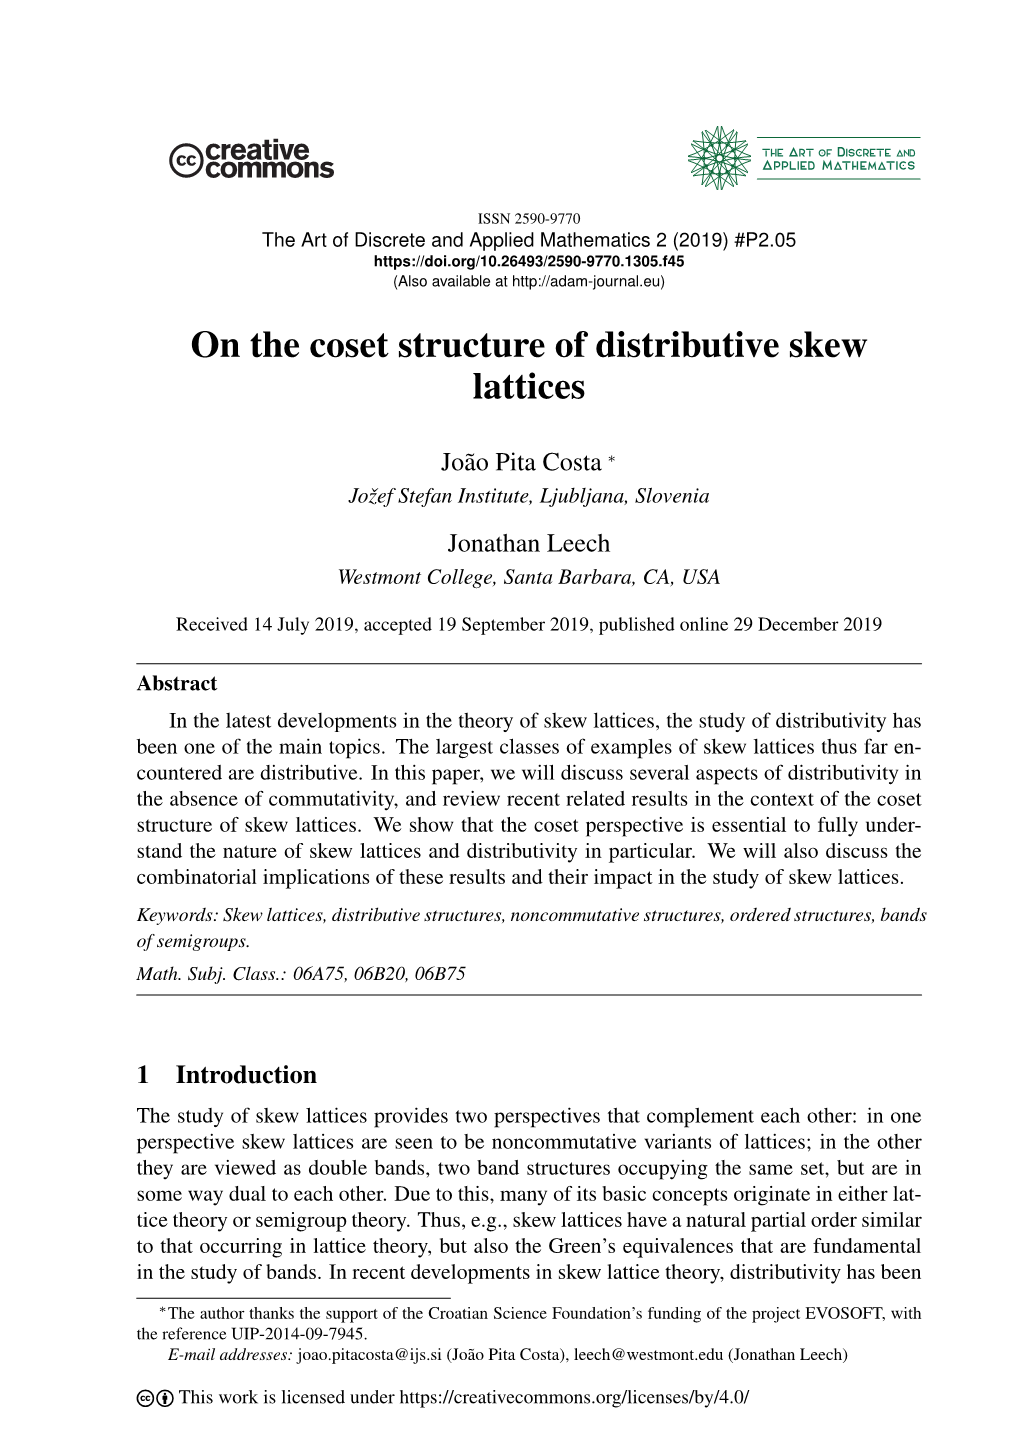 On the Coset Structure of Distributive Skew Lattices